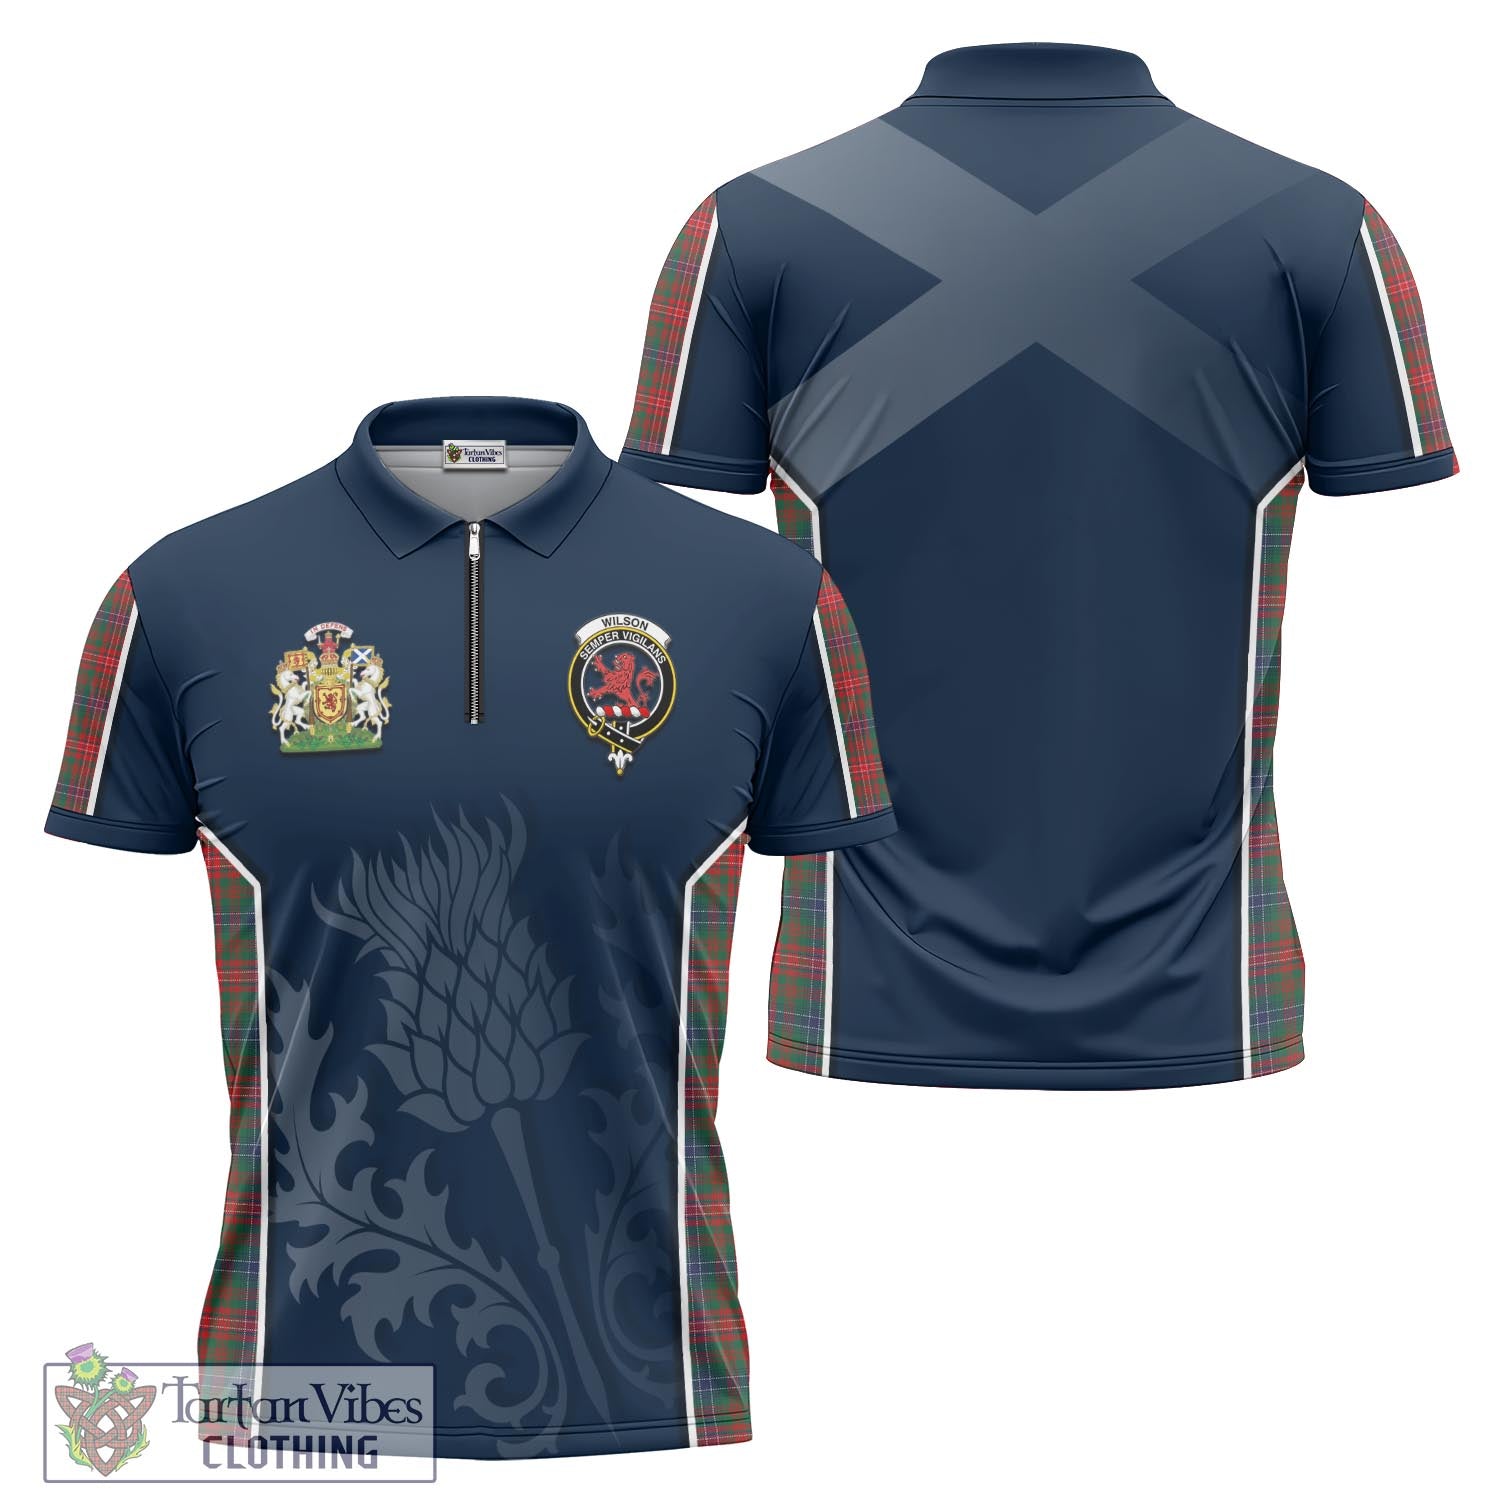 Tartan Vibes Clothing Wilson Modern Tartan Zipper Polo Shirt with Family Crest and Scottish Thistle Vibes Sport Style